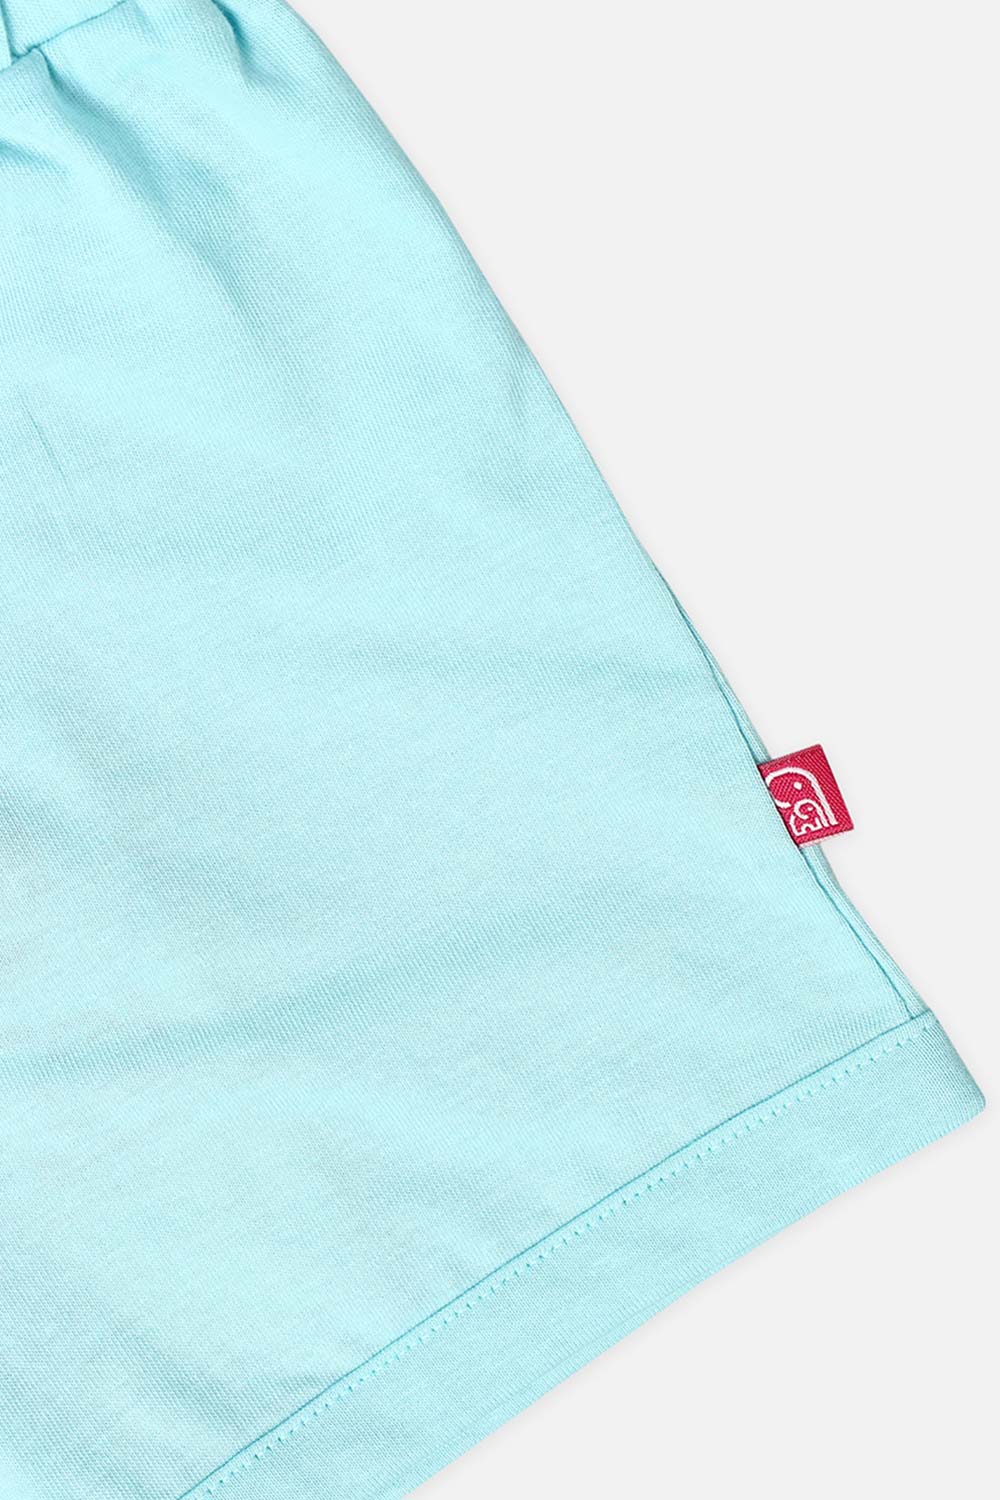 Oh Baby Comfy Shorts Knitted Light Blue-Sr02